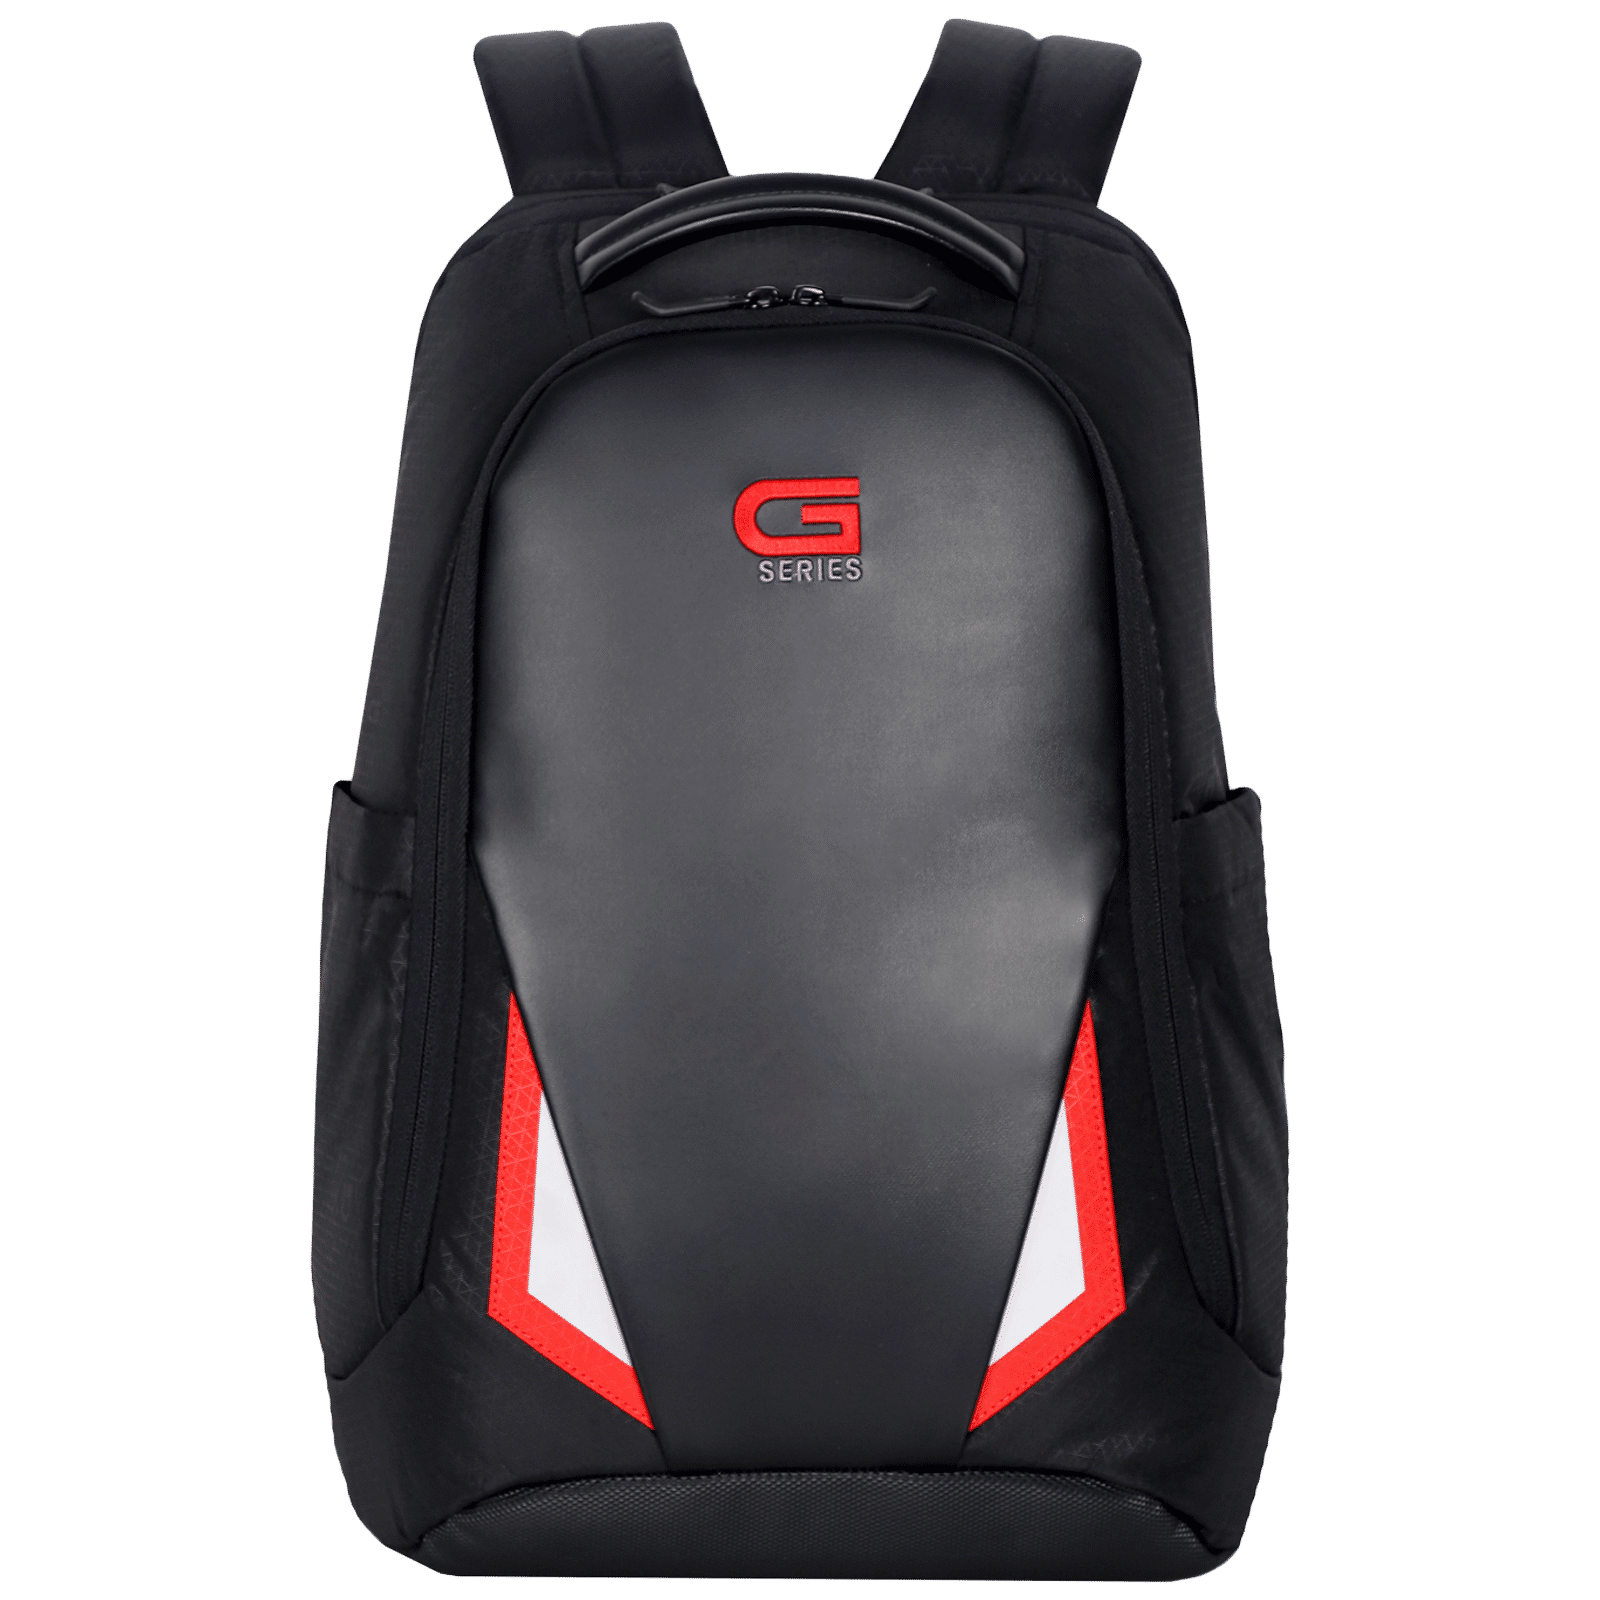 Amazon.com: Dell Gaming Backpack 17